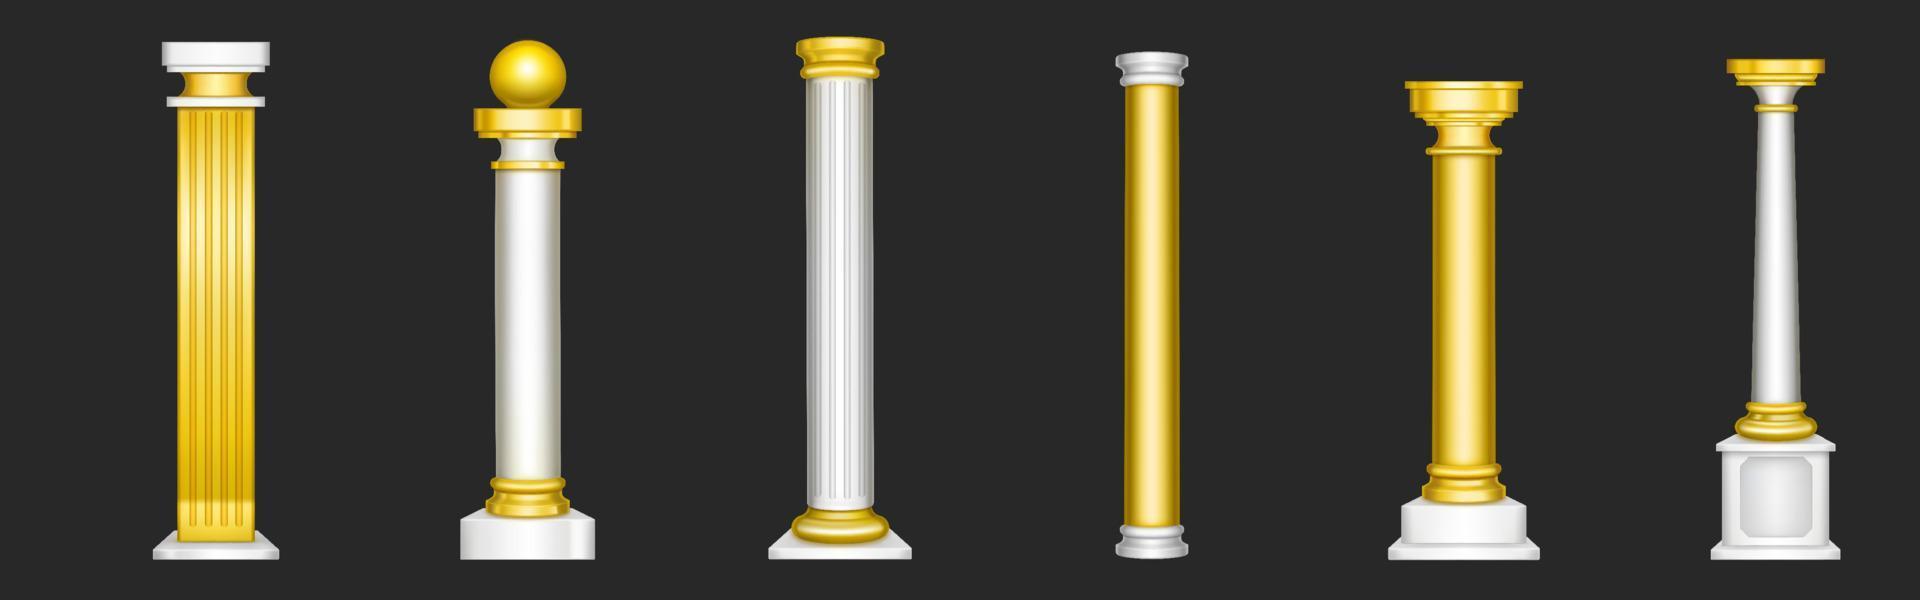 Ancient white and gold greek columns vector